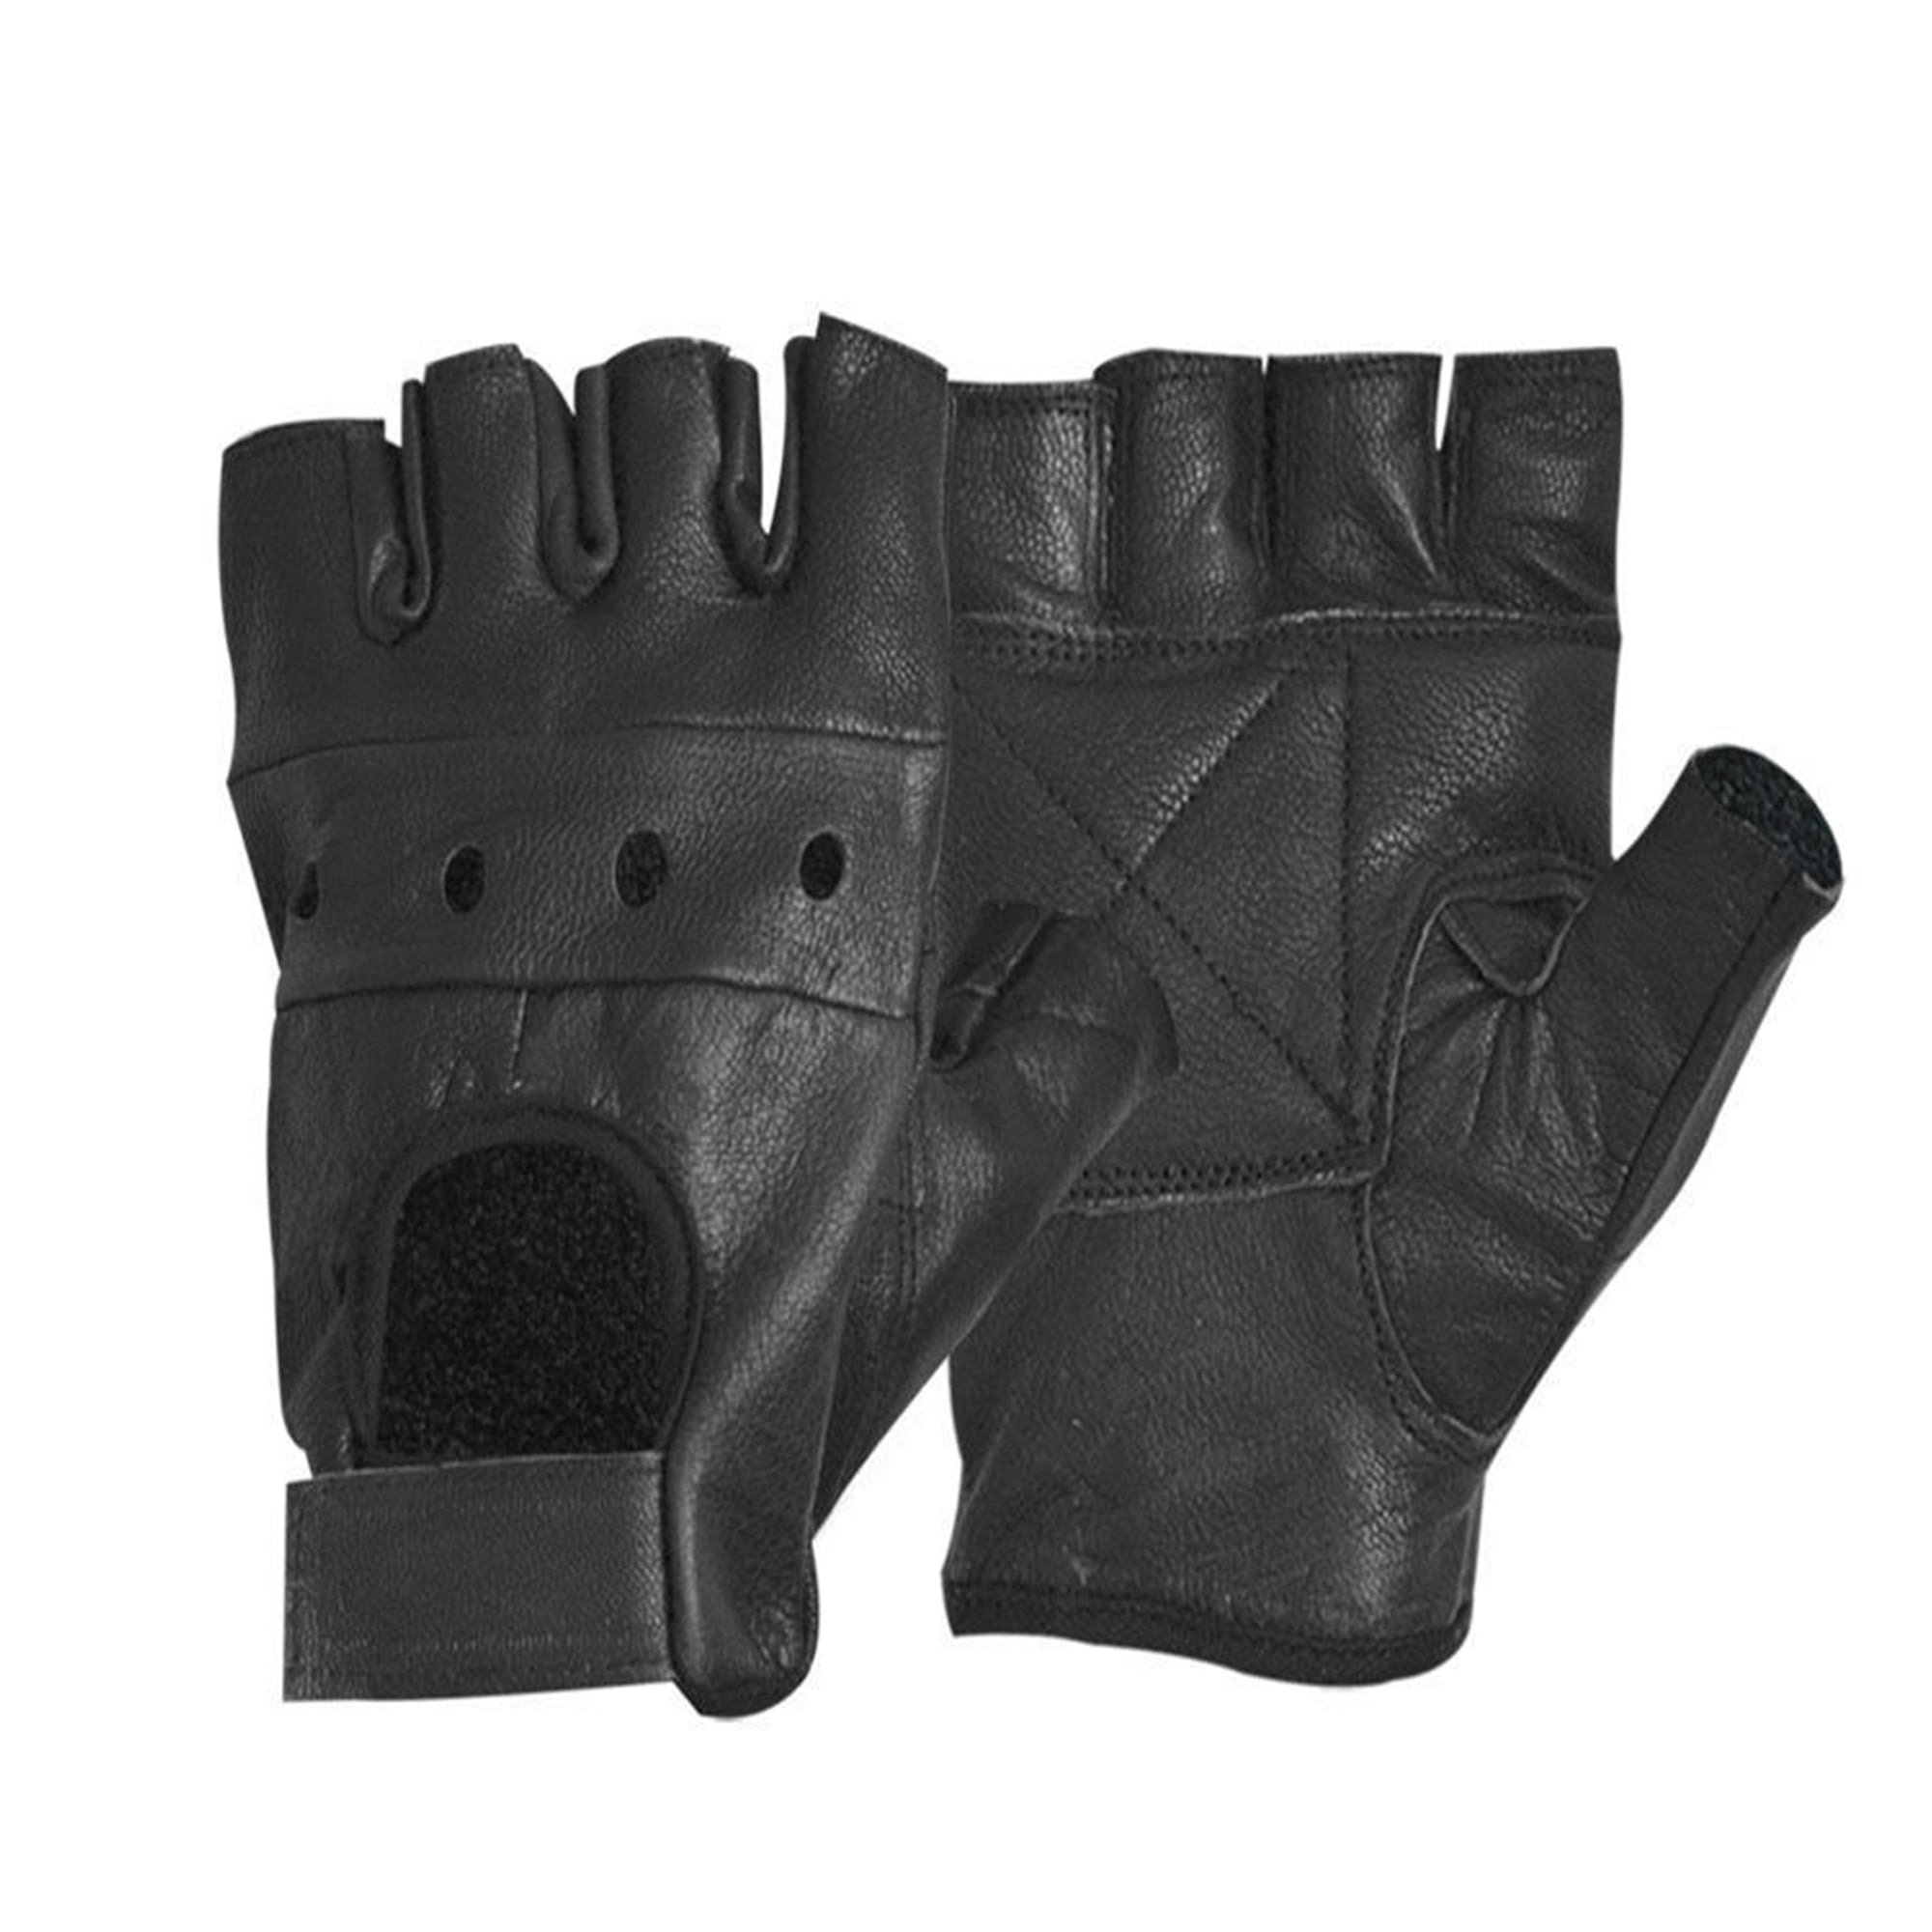 LEATHER WHEELCHAIR GLOVES FINGERLESS HALF FINGER WEIGHT LIFTING TRAINING FITNESS 